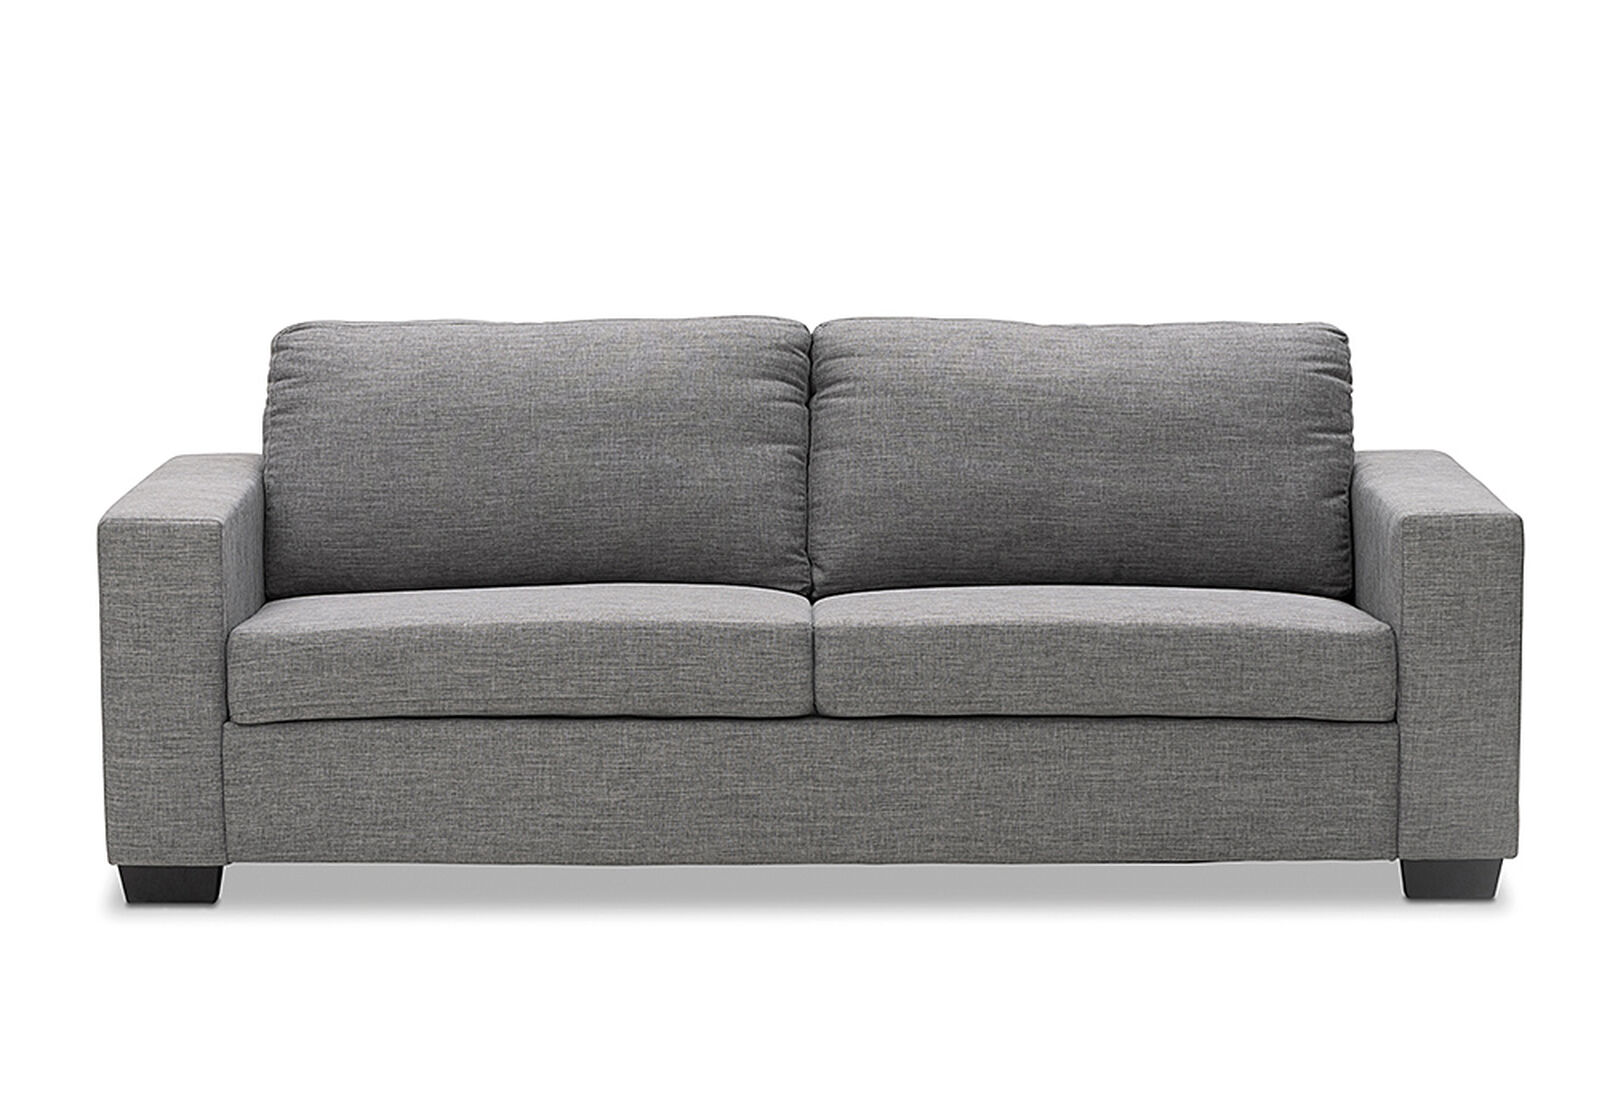 Grey Bonza Fabric 3 Seater Sofa Amart, How Much Fabric Is Needed To Cover A 3 Seater Sofa